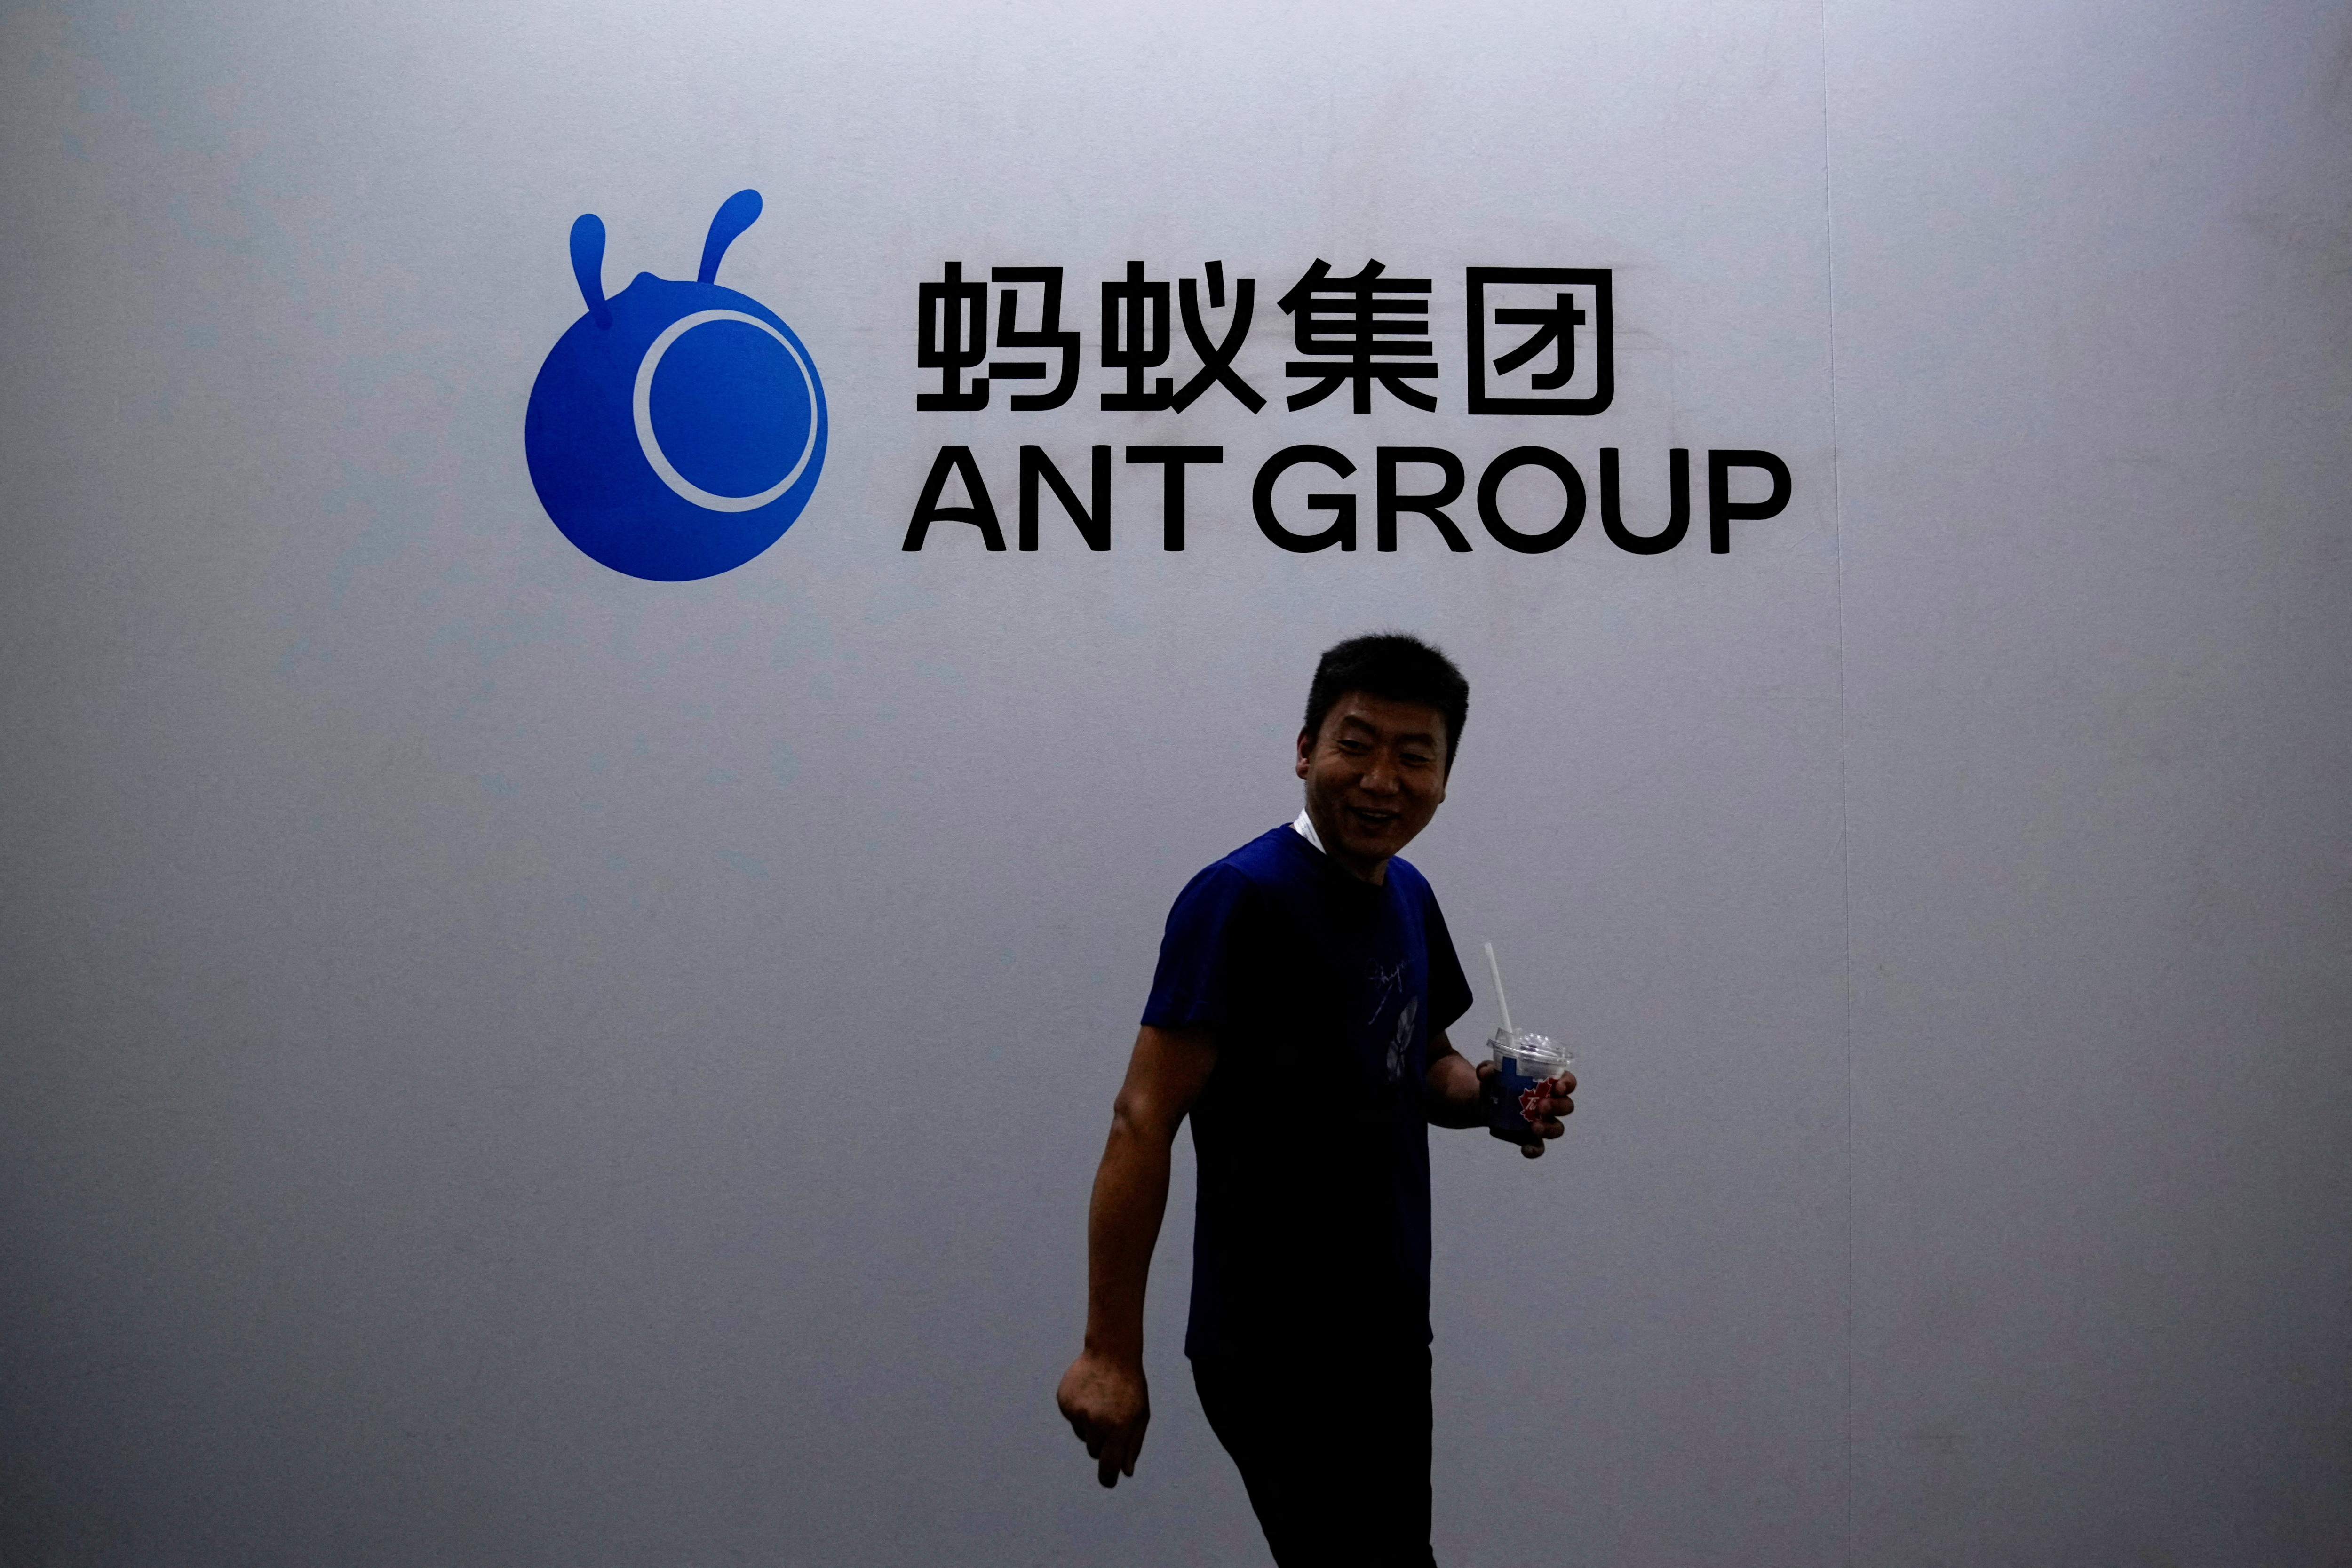 Ant Group sign at conference in Shanghai